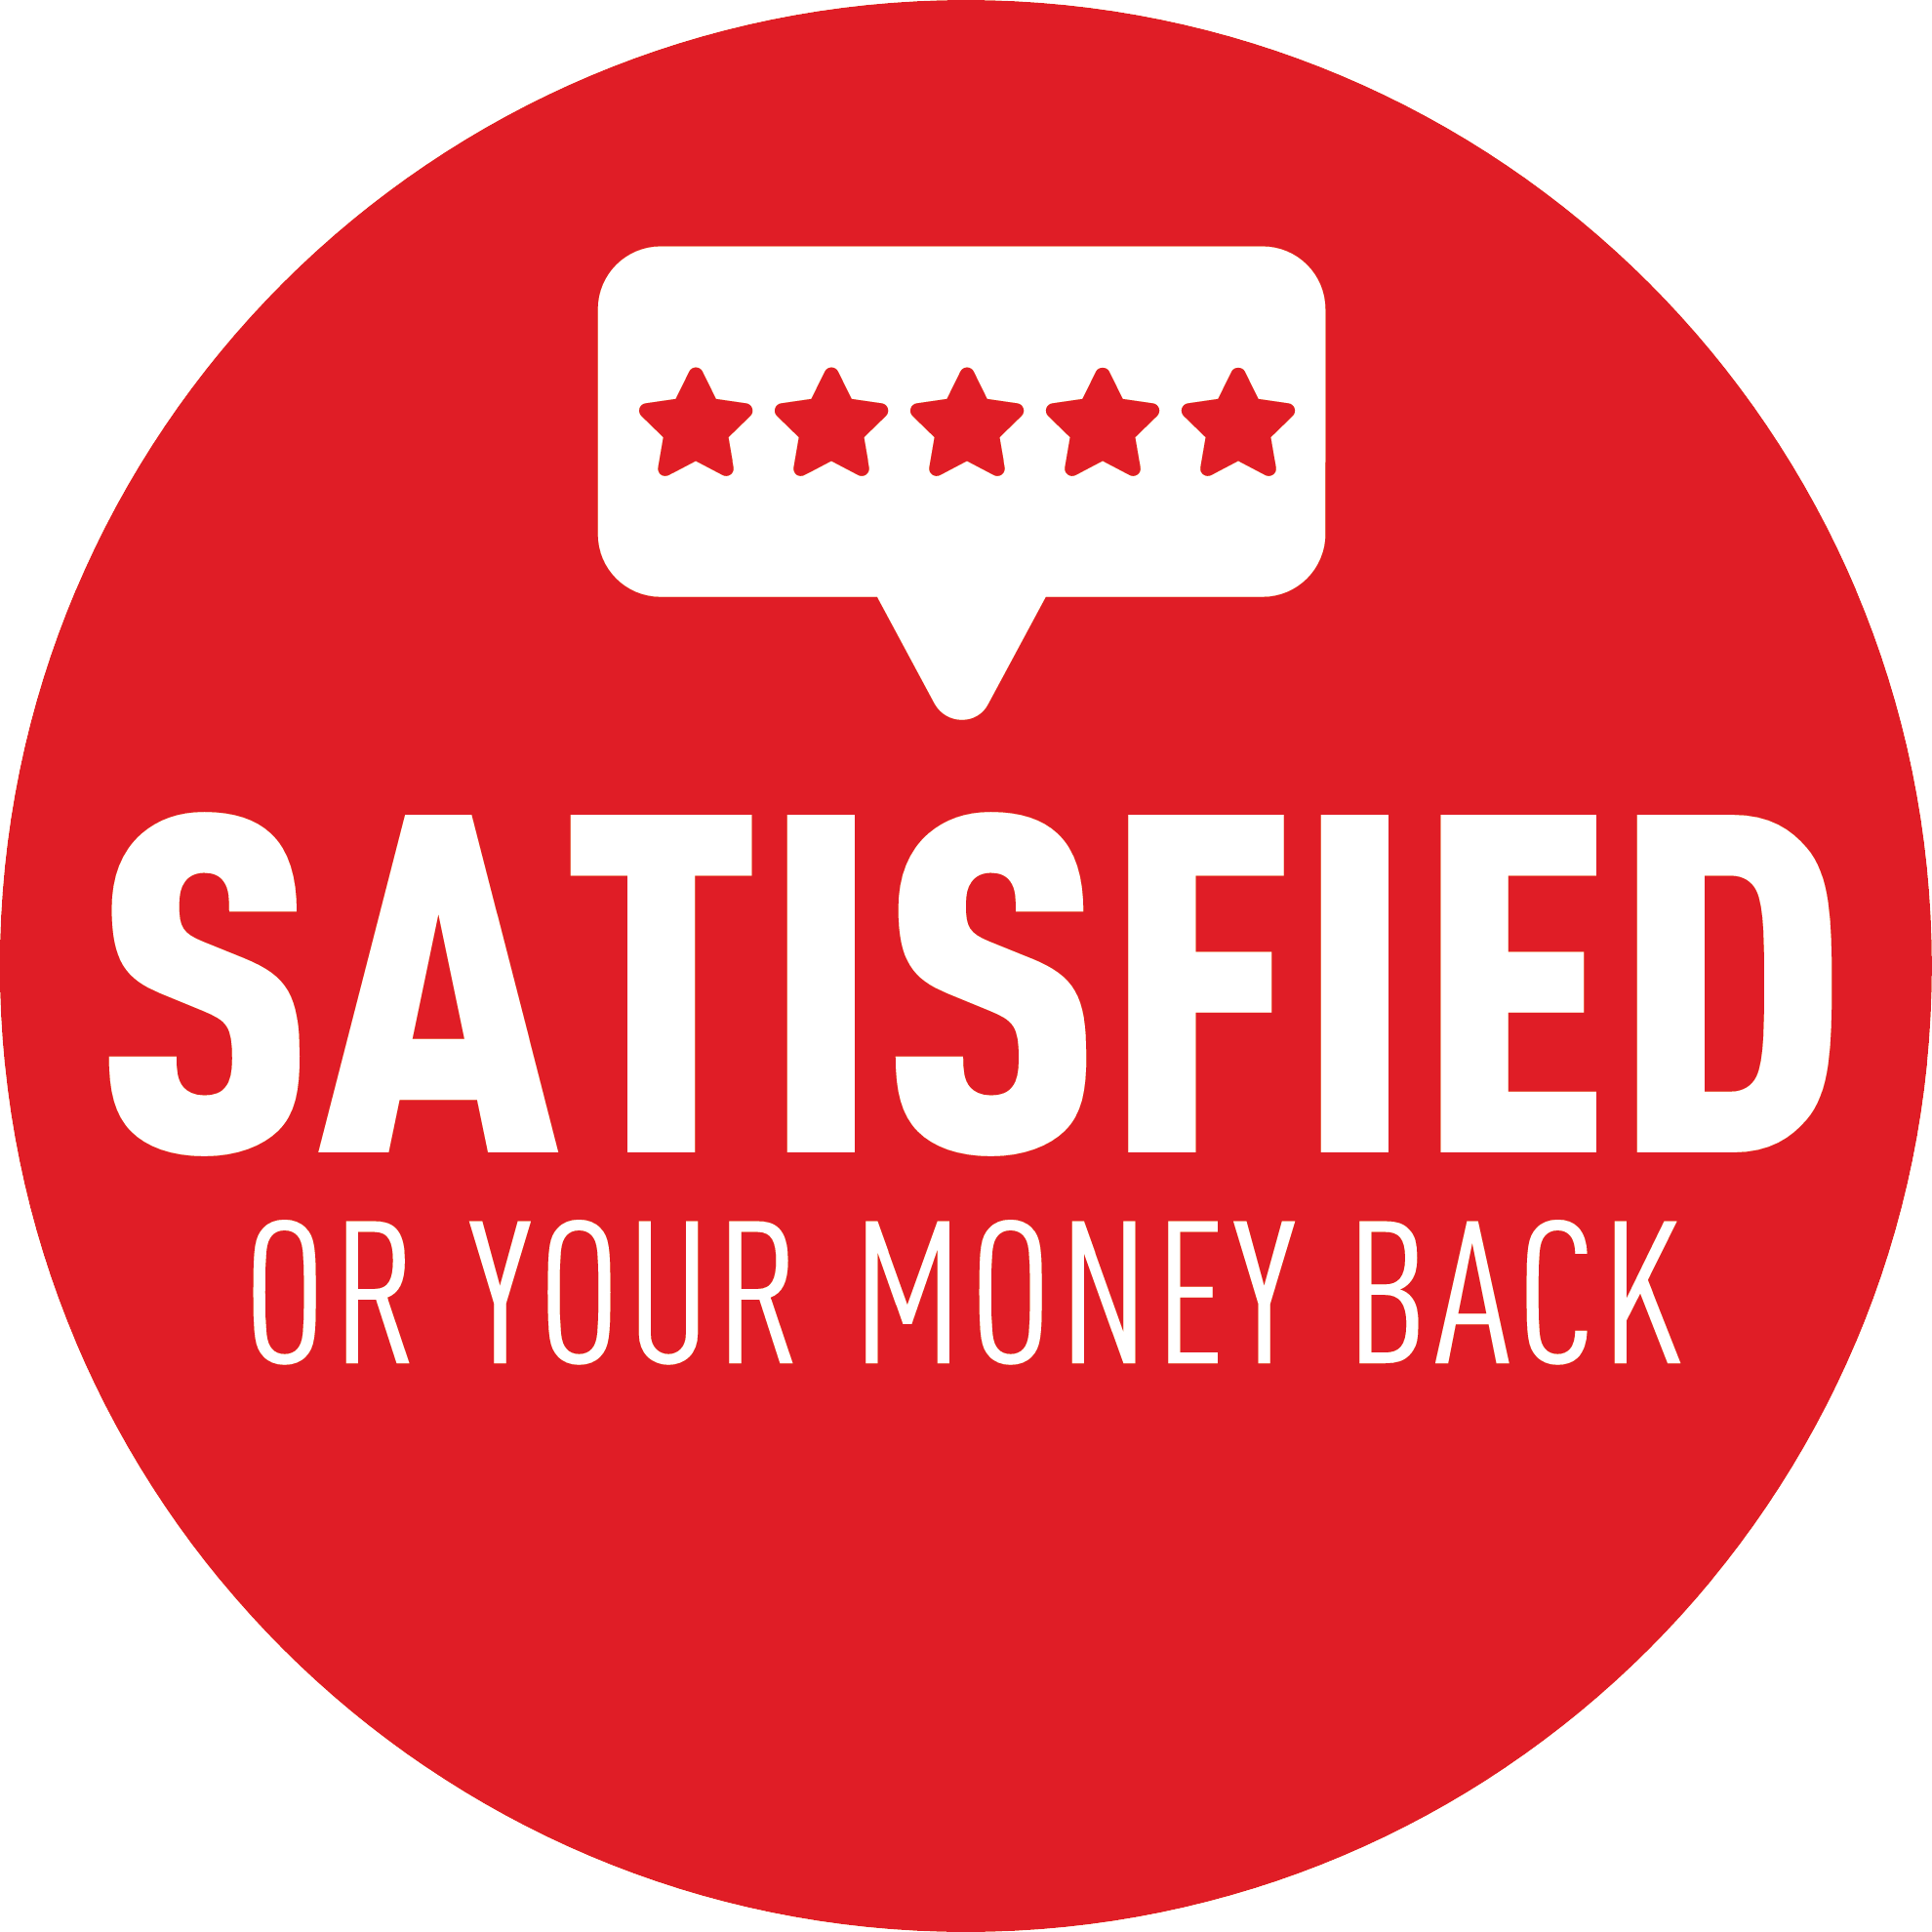 Local engagement on satisfied or you money back